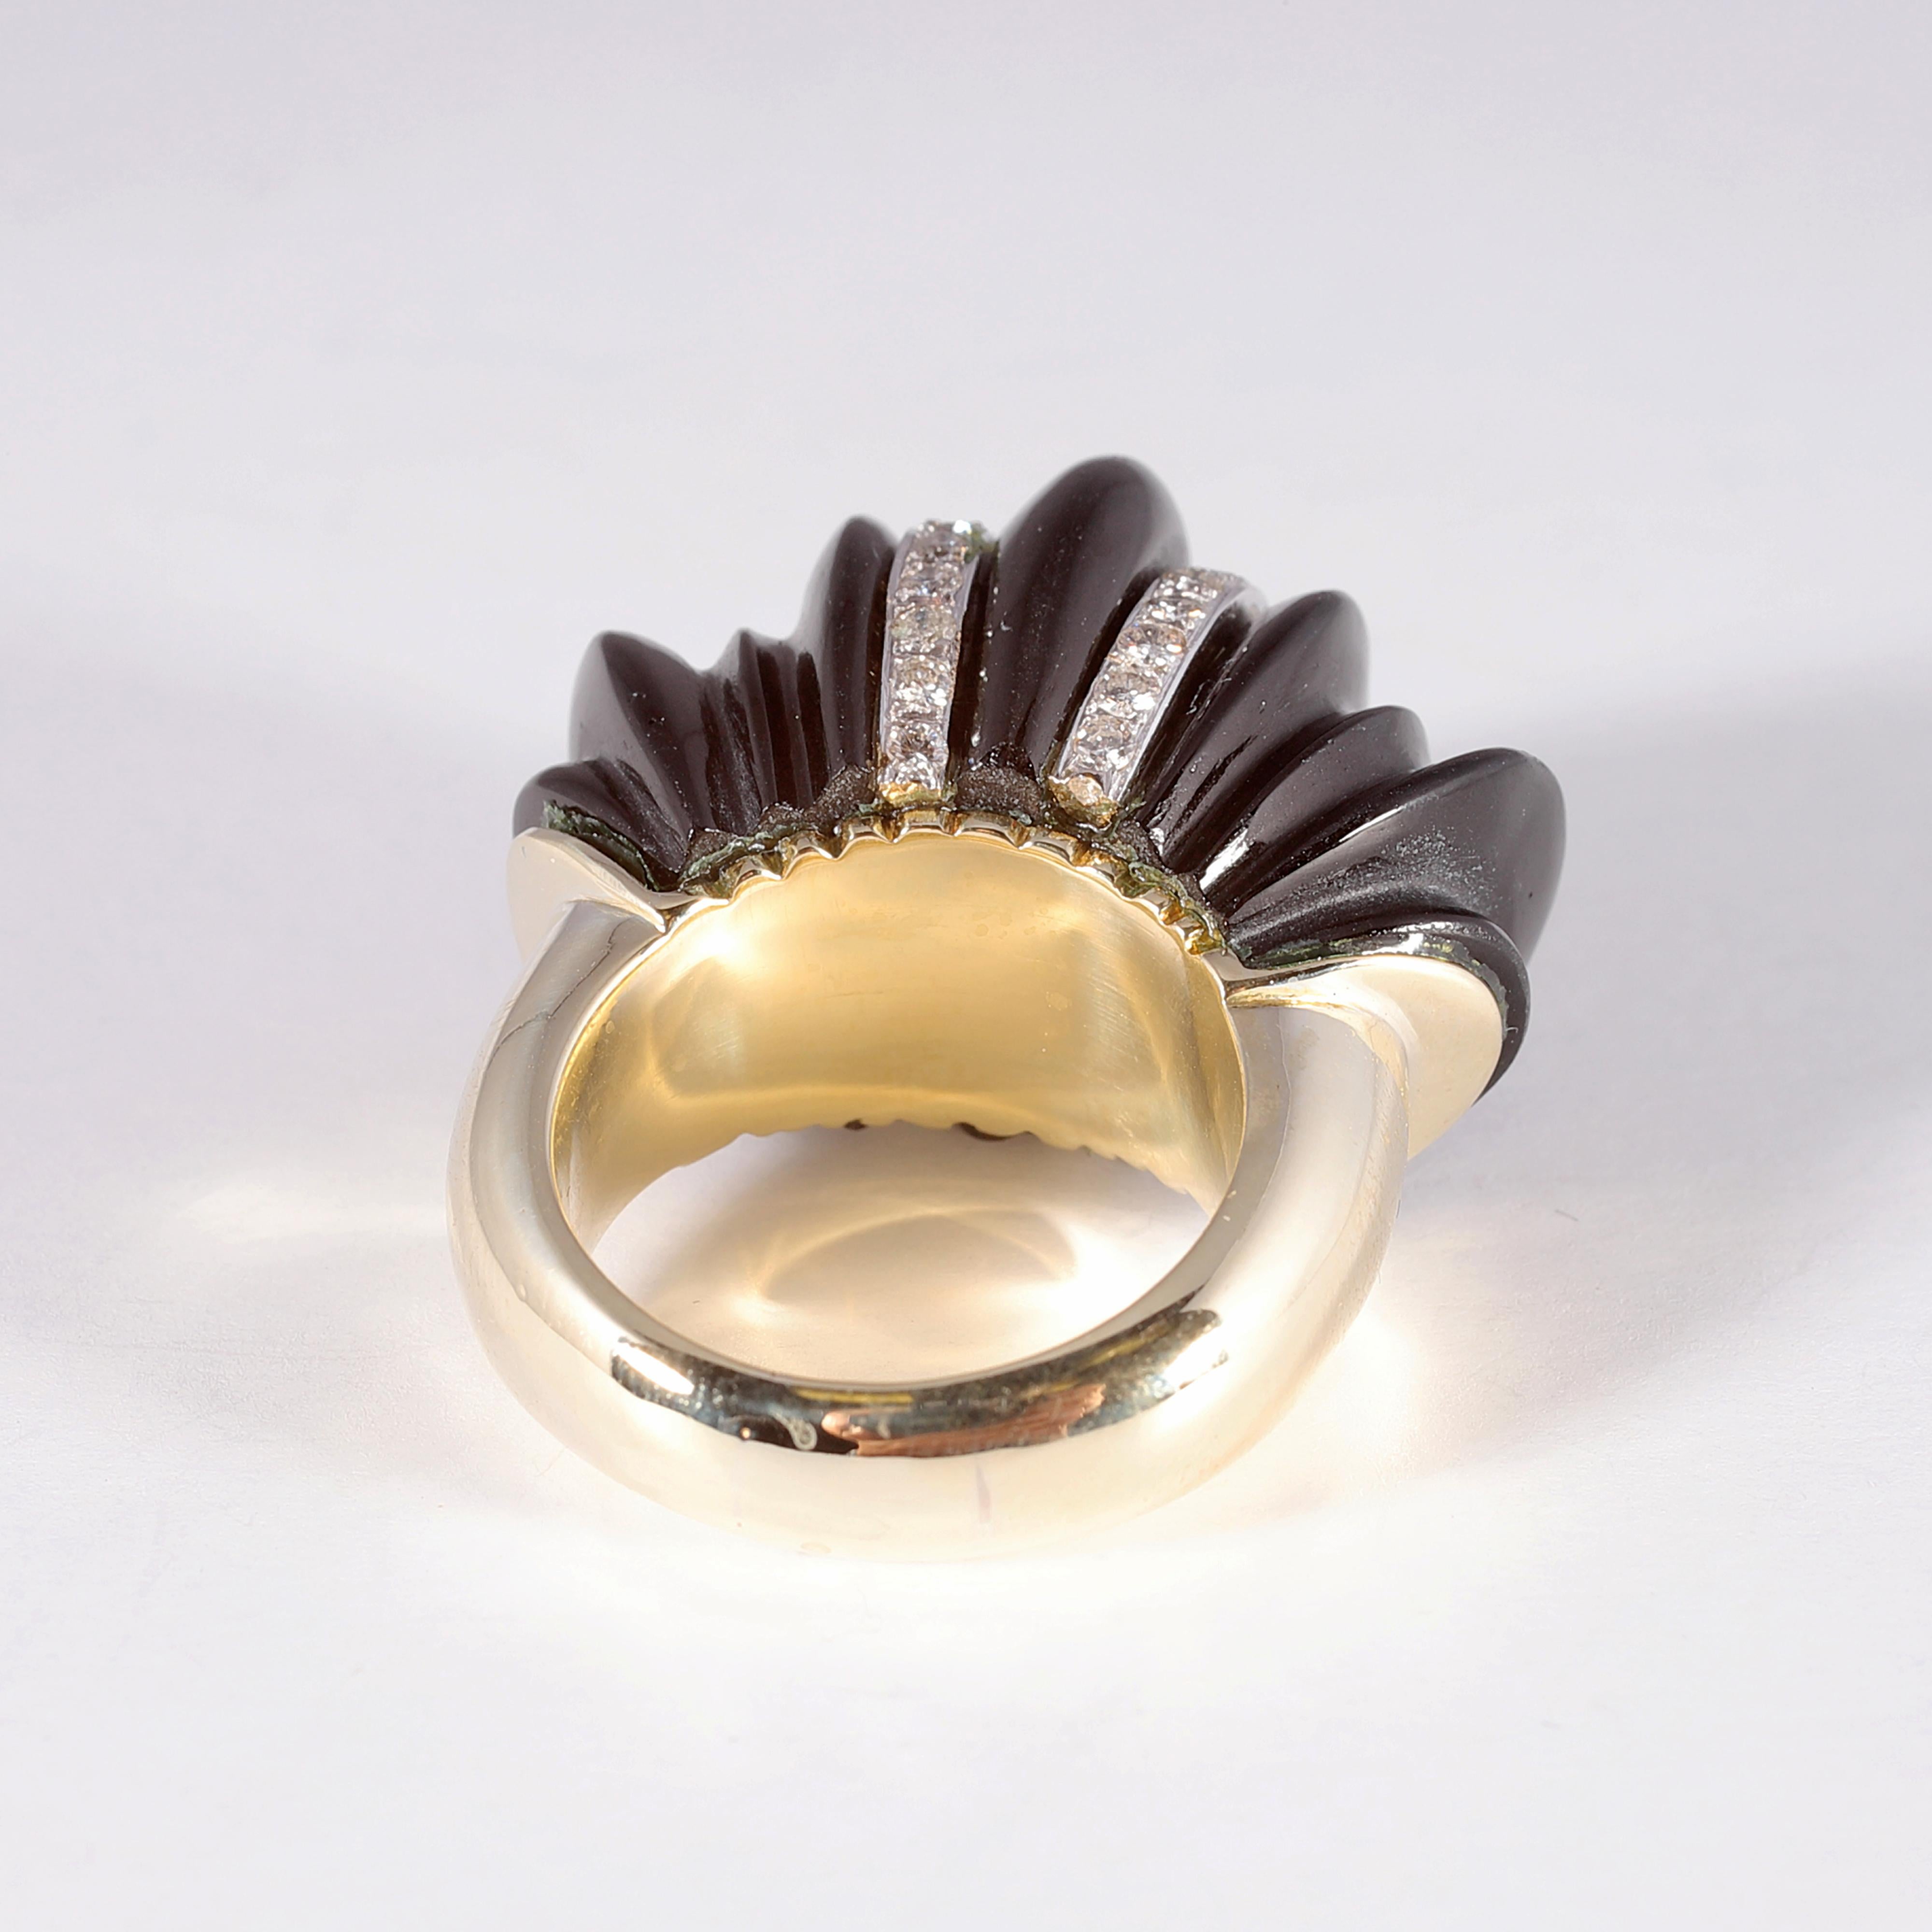 Such a stunning statement piece!  In 14 karat yellow gold, this beauty is enhanced by two rows of round bead-set, diamonds across the fluted black glass.  Size 6 1/2.